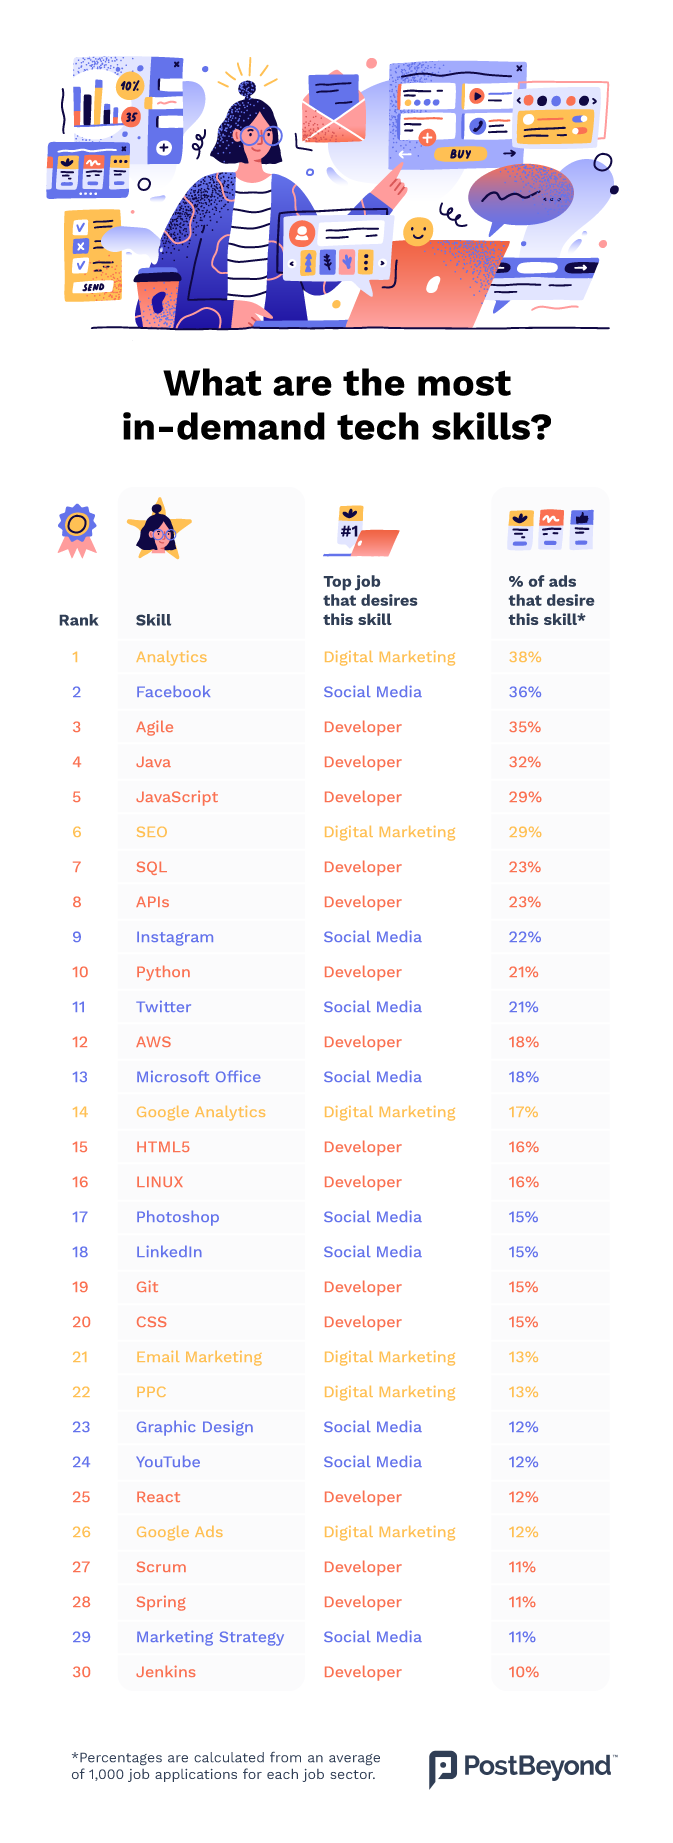 PostBeyond has analyzed three tech sectors - development, digital marketing and social media - to reveal the most in-demand tech skills listed in job advertisements.